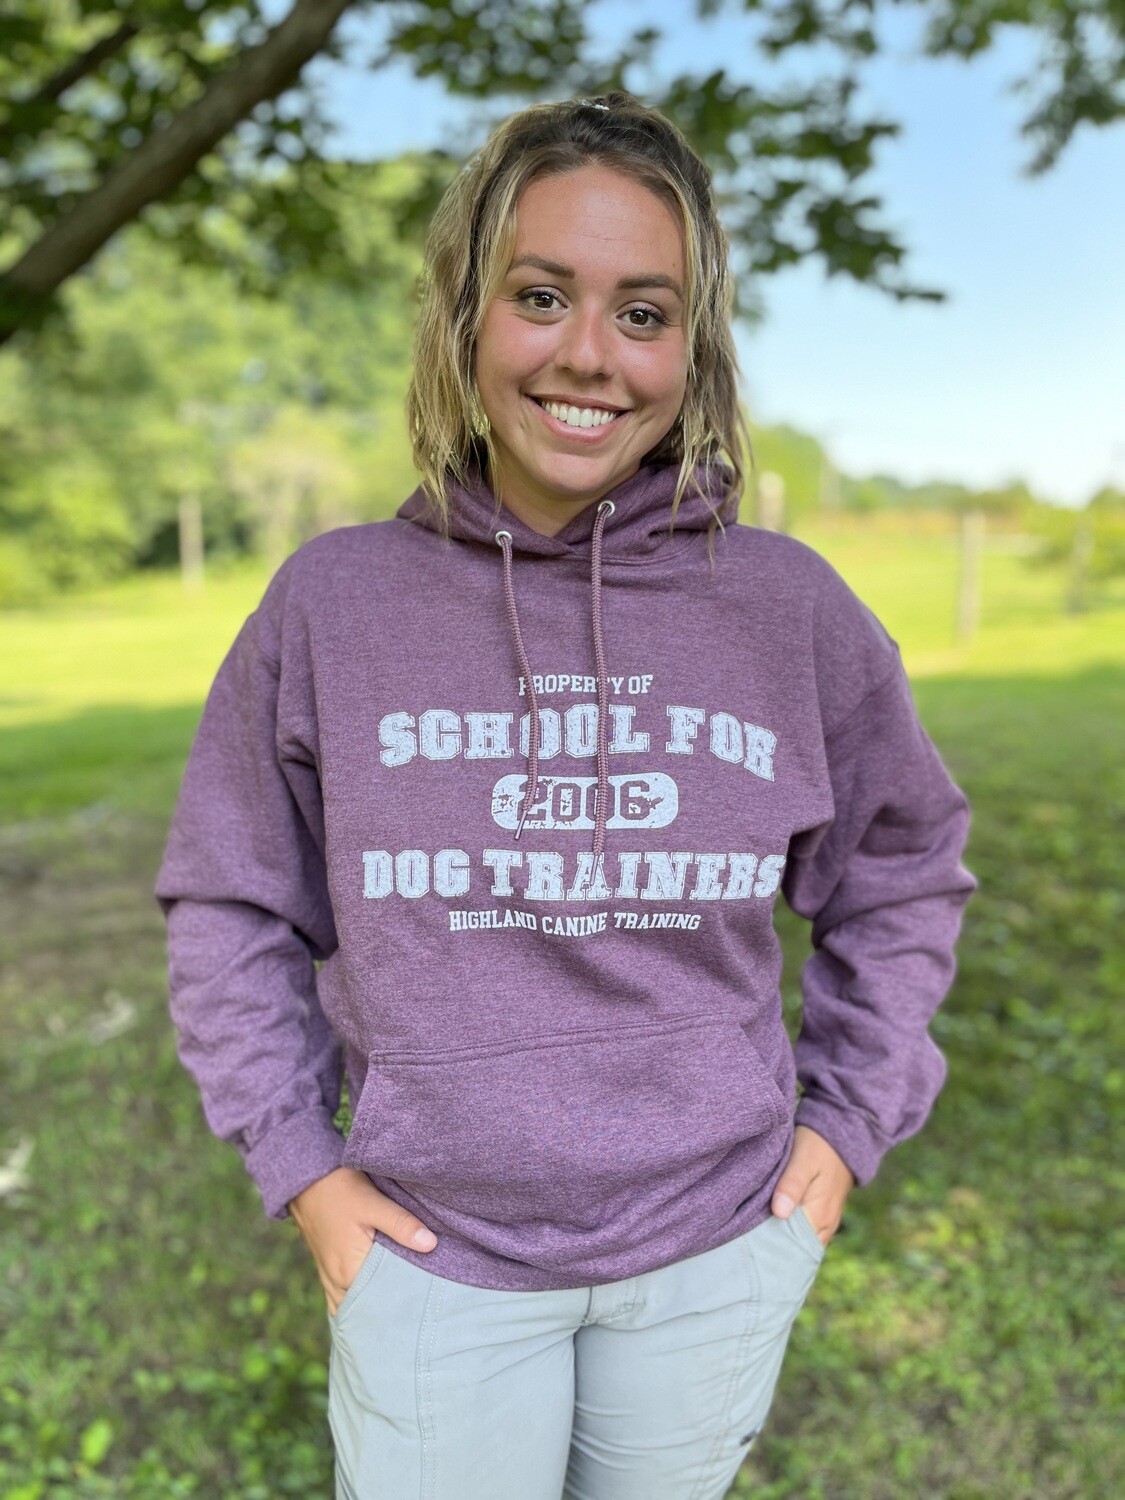 Property of School for Dog Trainers Hoodie